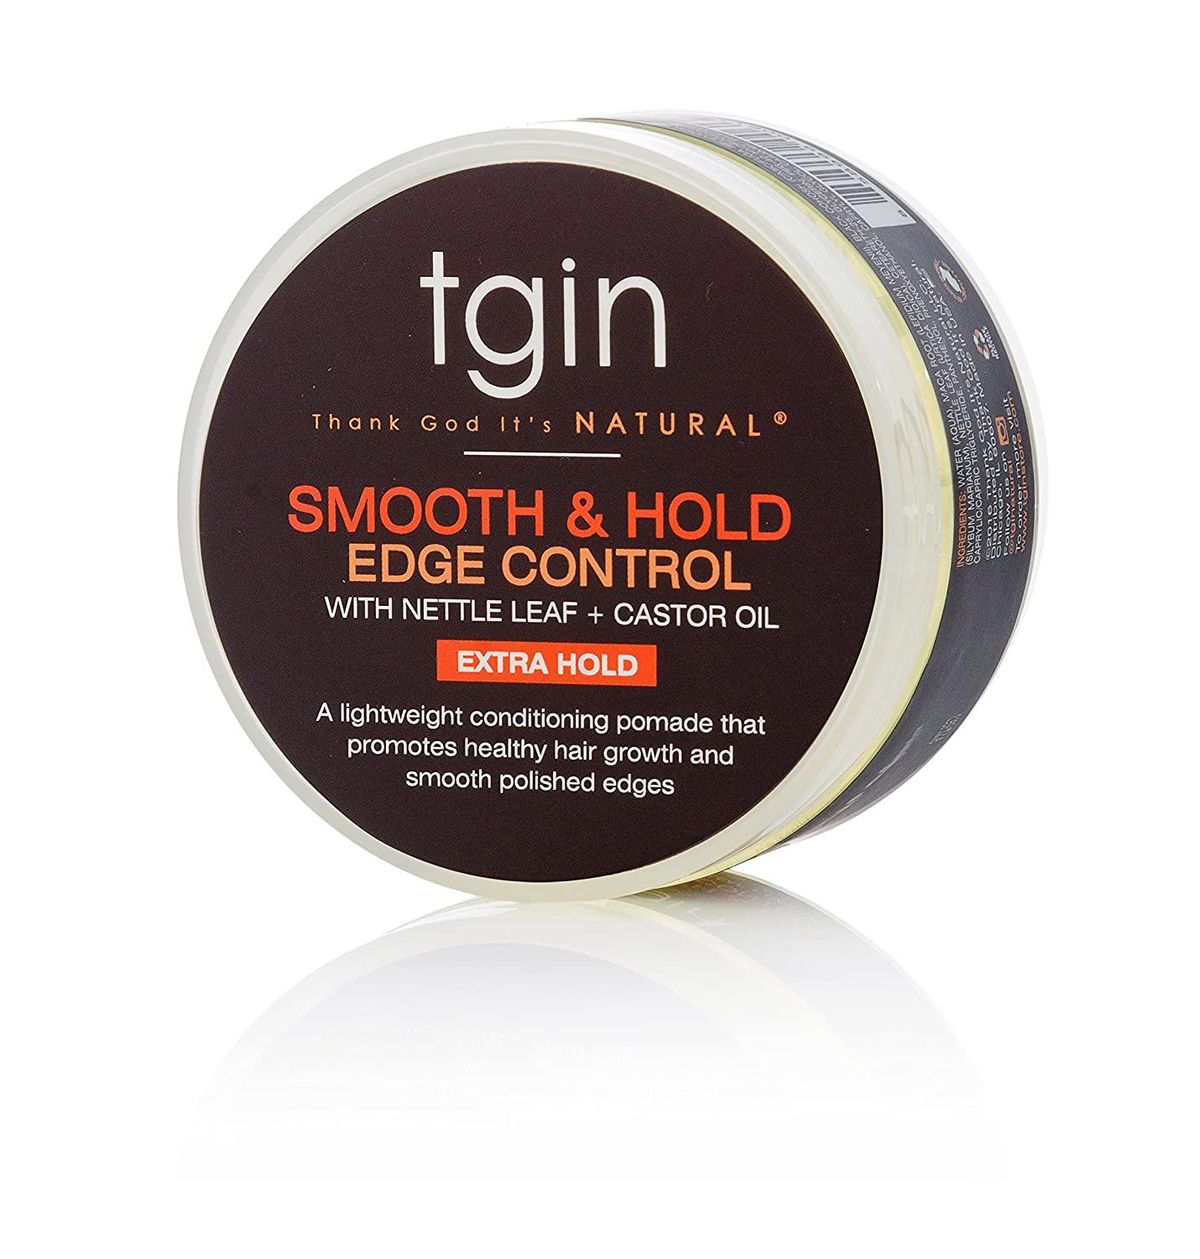 Smooth & Hold Edge Control